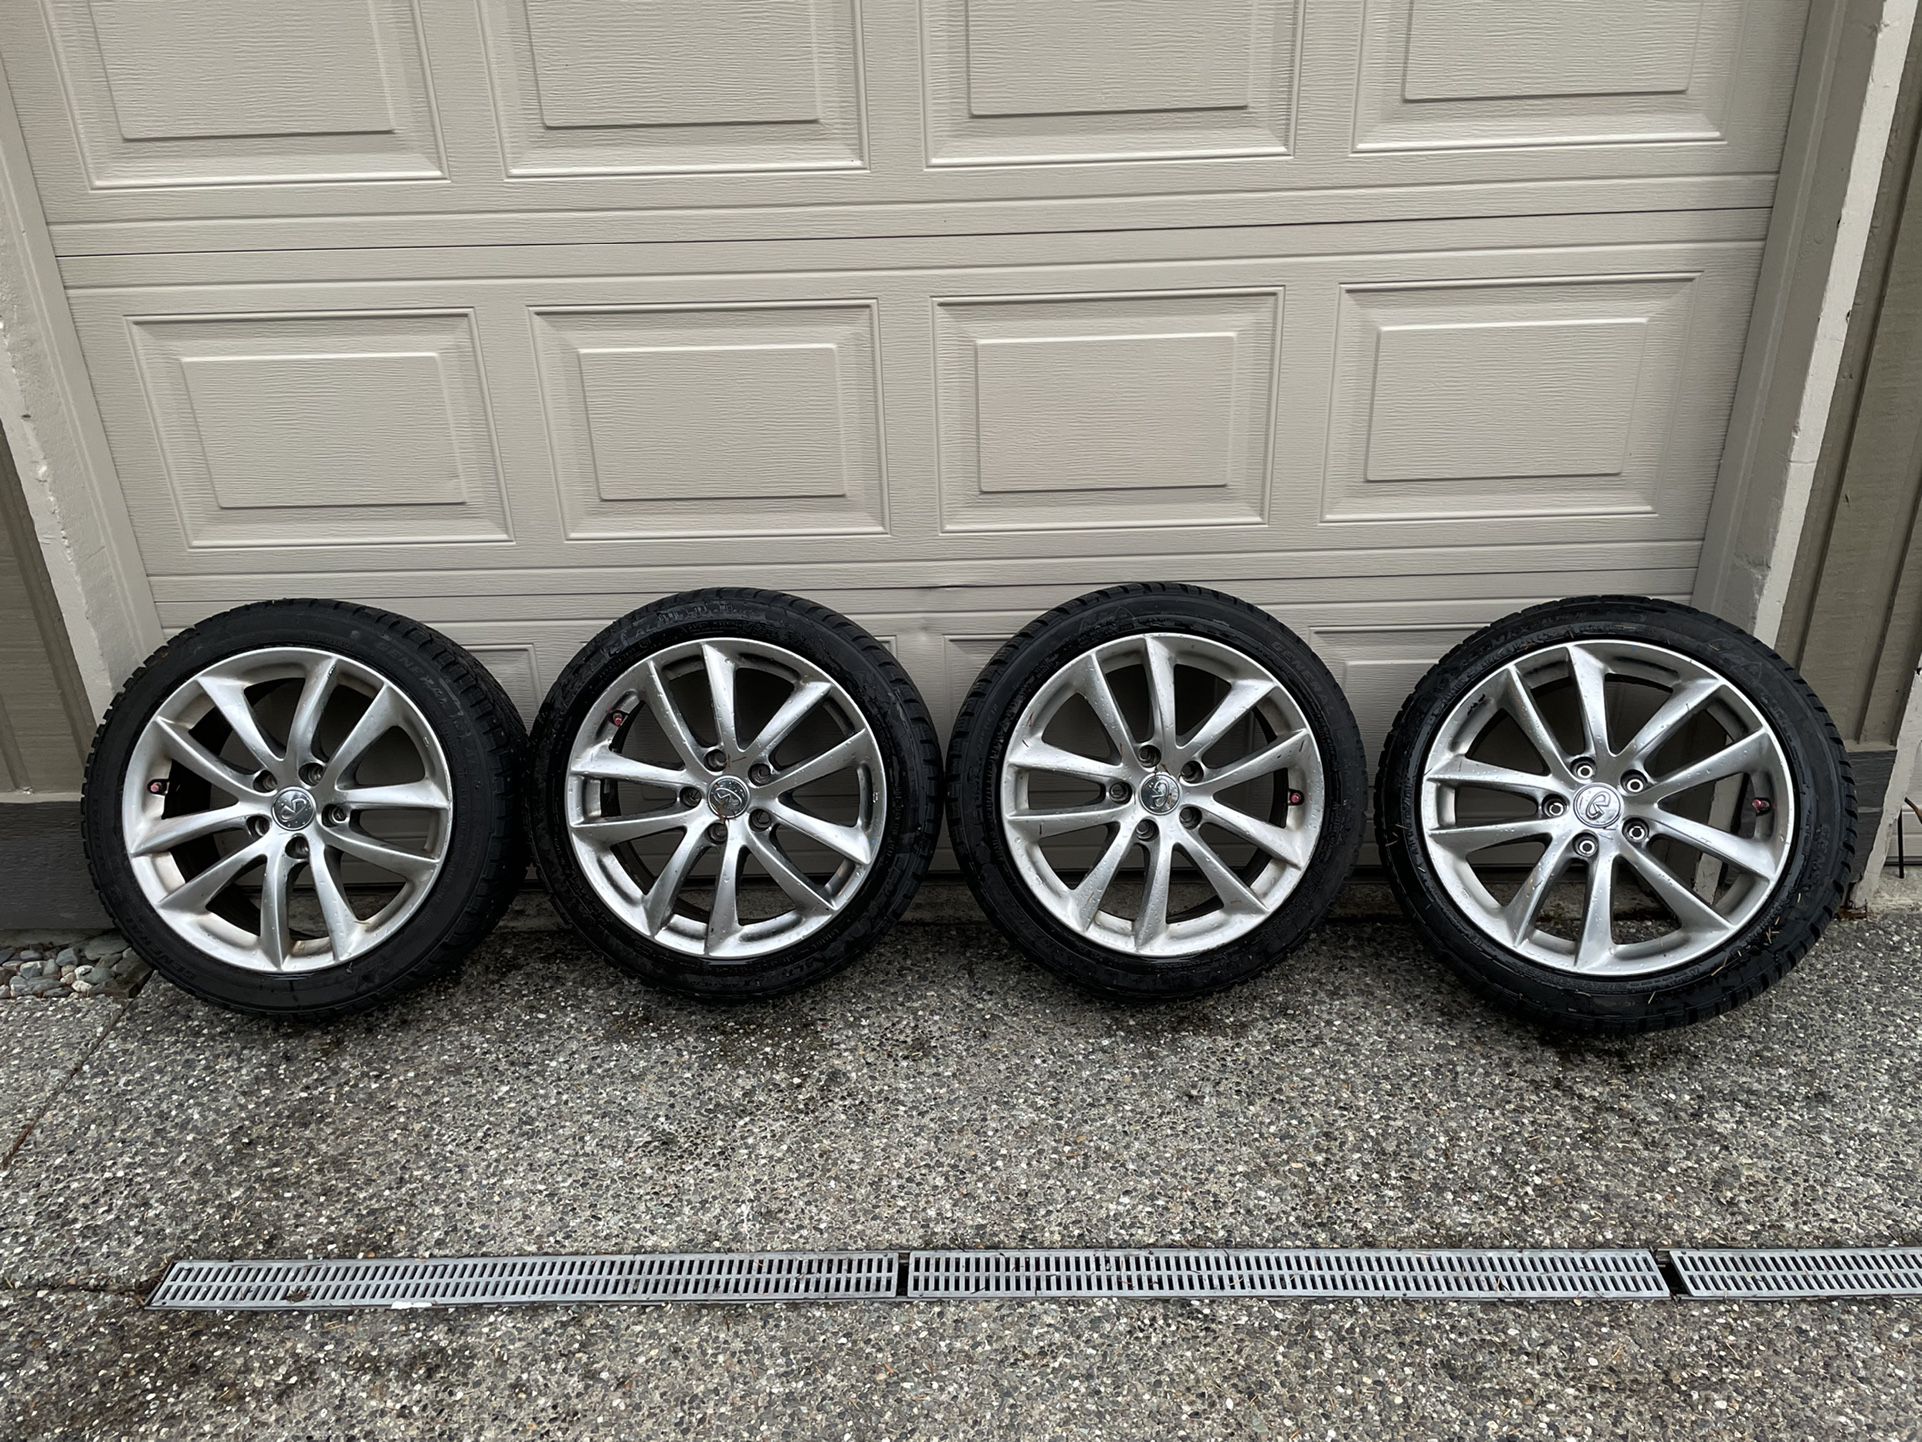 G35 Infiniti Wheels And Snow Tires